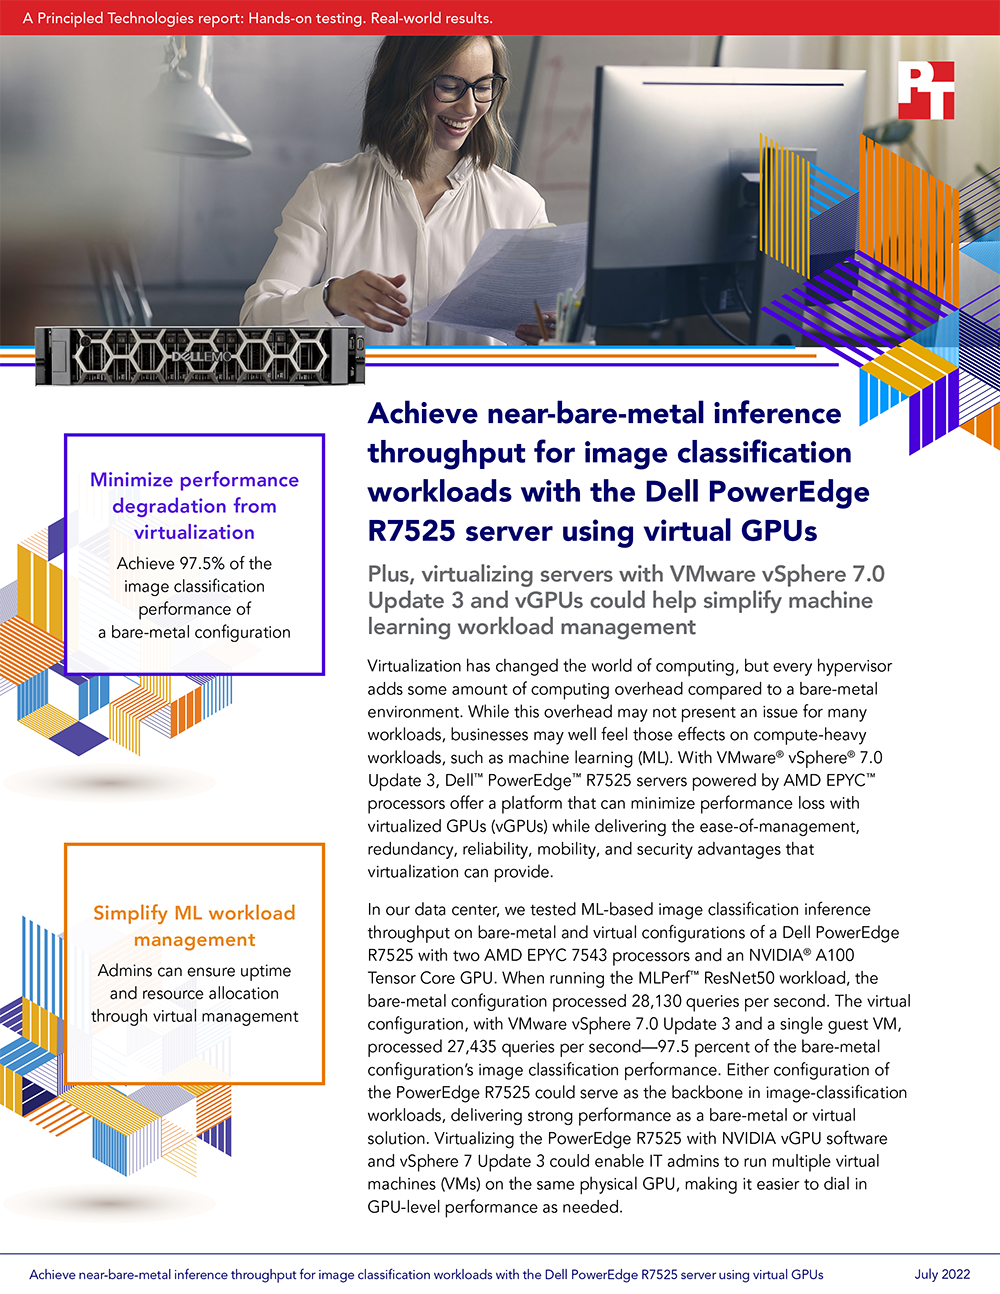 Principled Technologies Finds That Bare-Metal and Virtualized Dell PowerEdge R7525 Servers Delivered Nearly the Same Performance for an Inference Workload